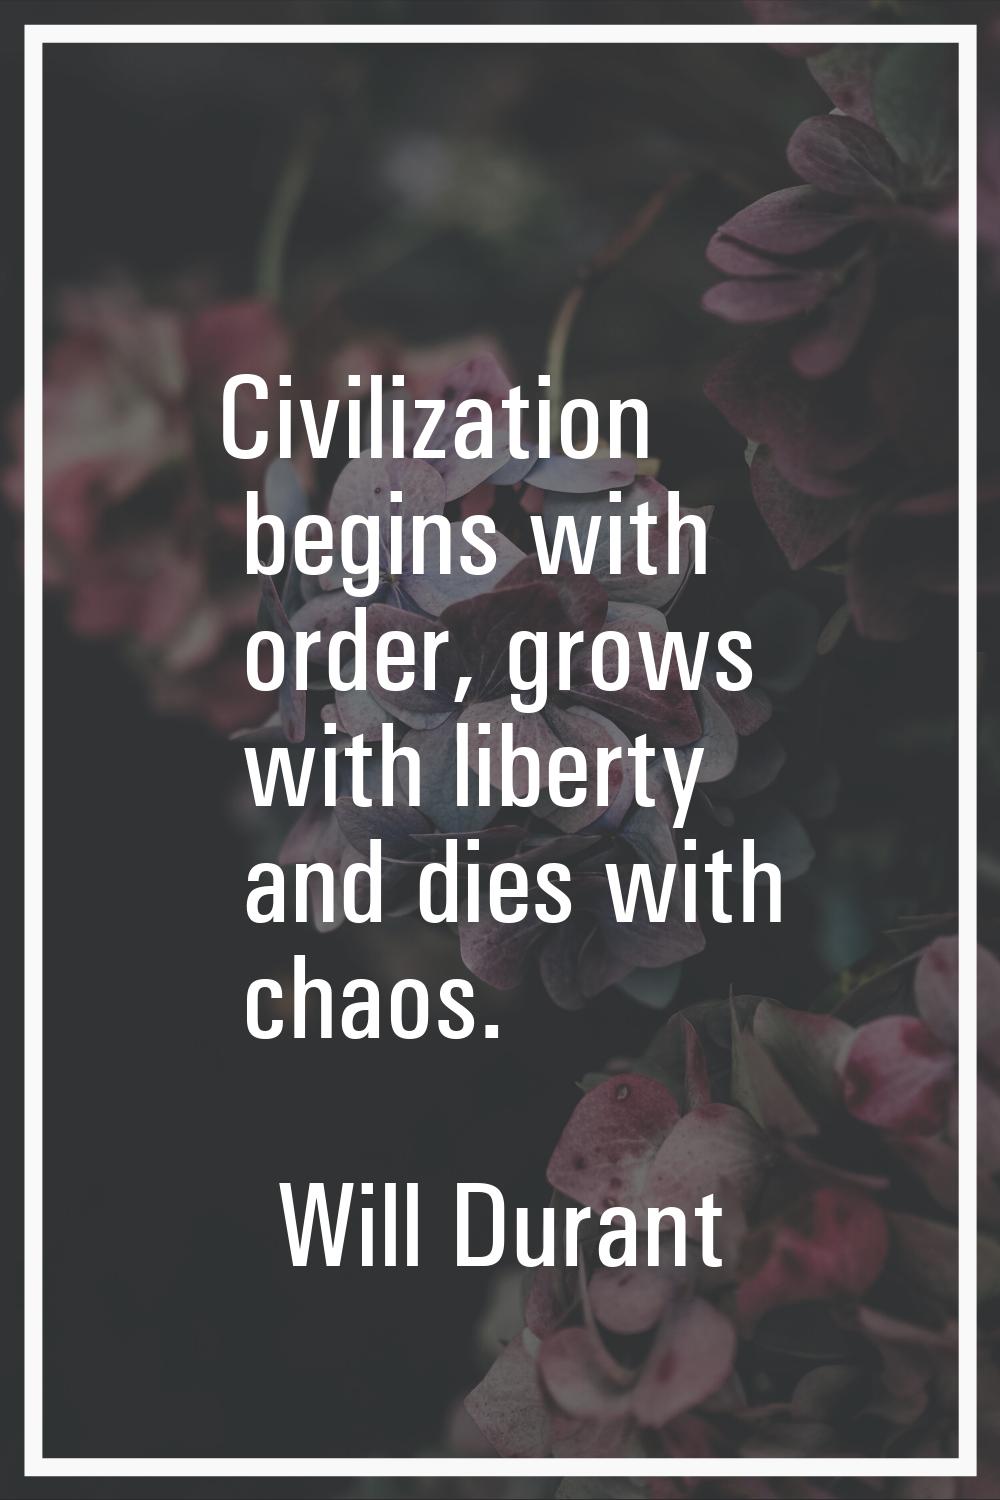 Civilization begins with order, grows with liberty and dies with chaos.